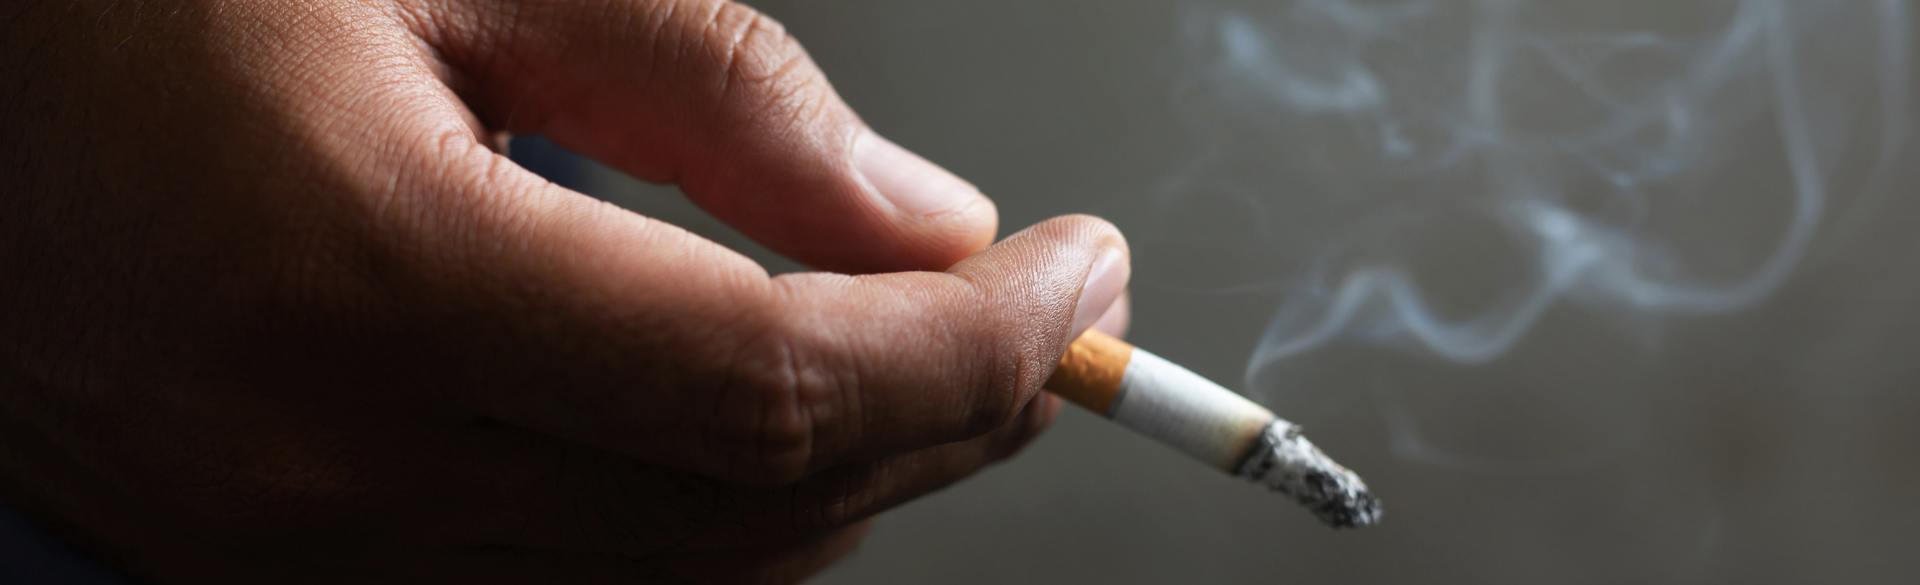 Doctors want patients to stop smoking prior to surgery, due to the effects smoking has on the body. 